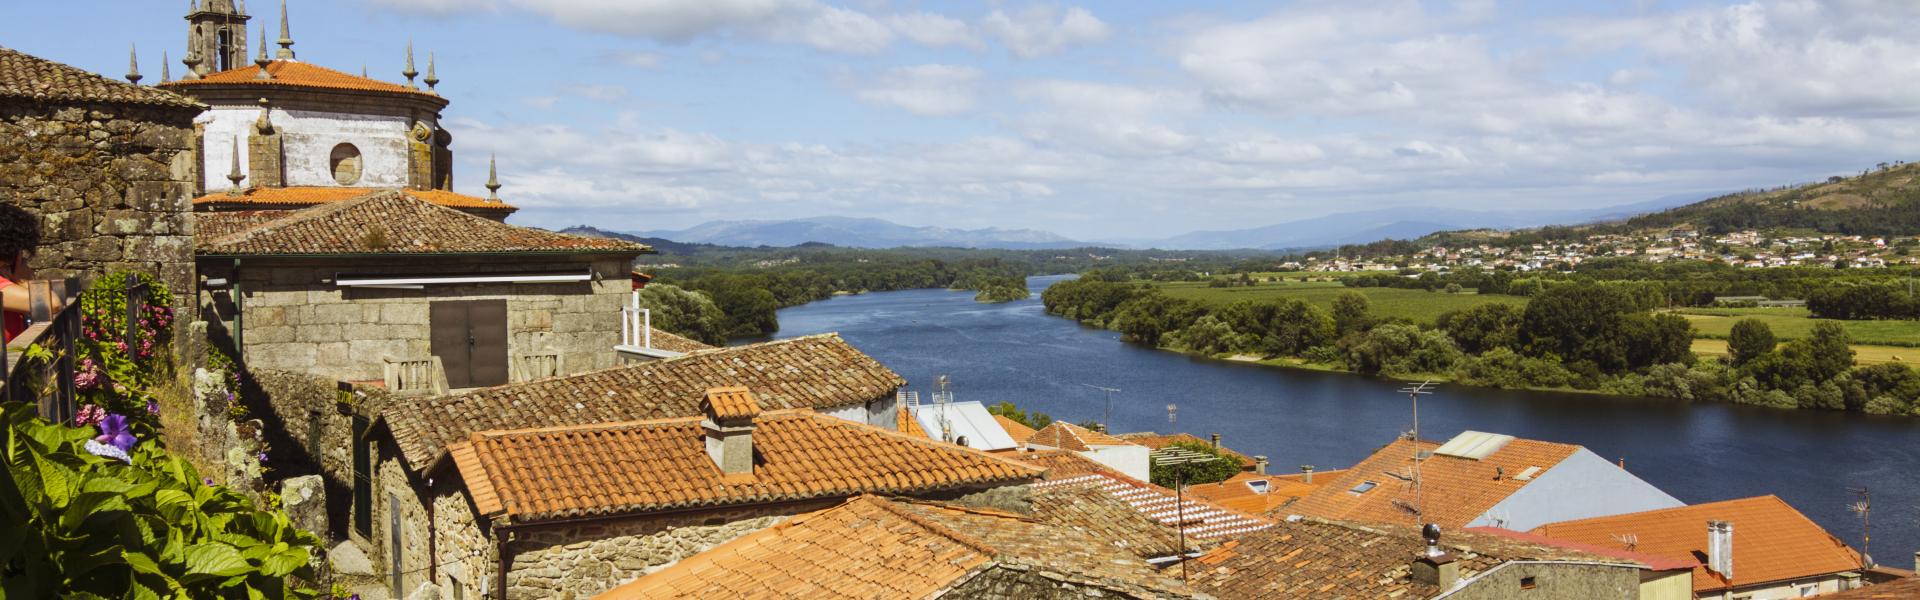 Tuy, Pontevedra province, Galicia, Spain : Medieval border town of Tui. Portugal in background to the other side of the Minho river as seen from the gardens of the cathedral.